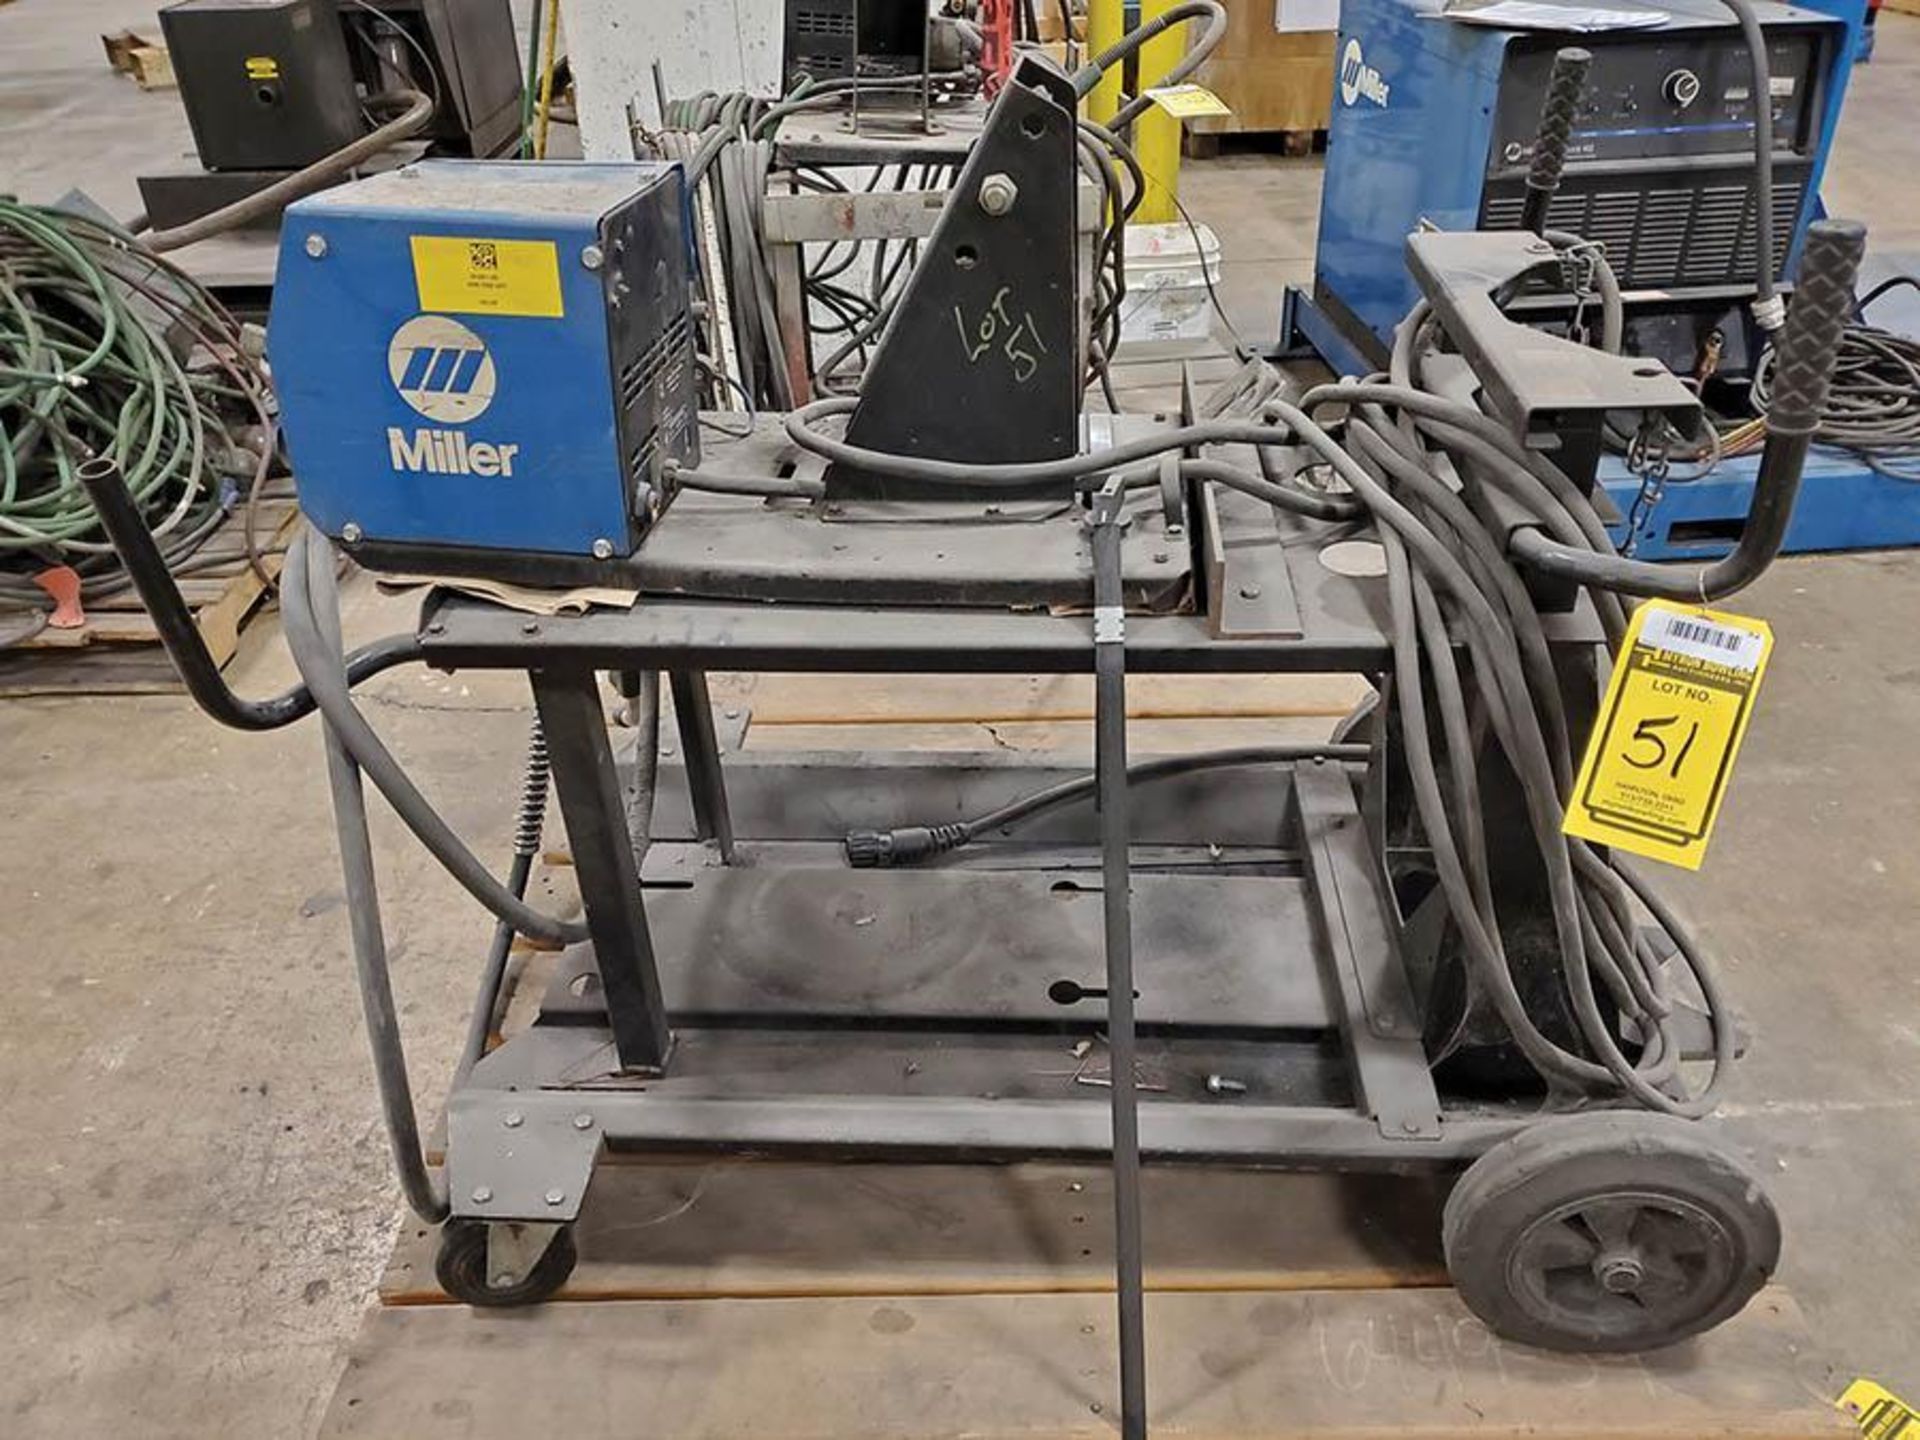 MILLER 60 SERIES 24V WIRE FEEDER WITH REEL ON ROLLING CART WITH GROUNDS, NO HEAD, SOME LEAD